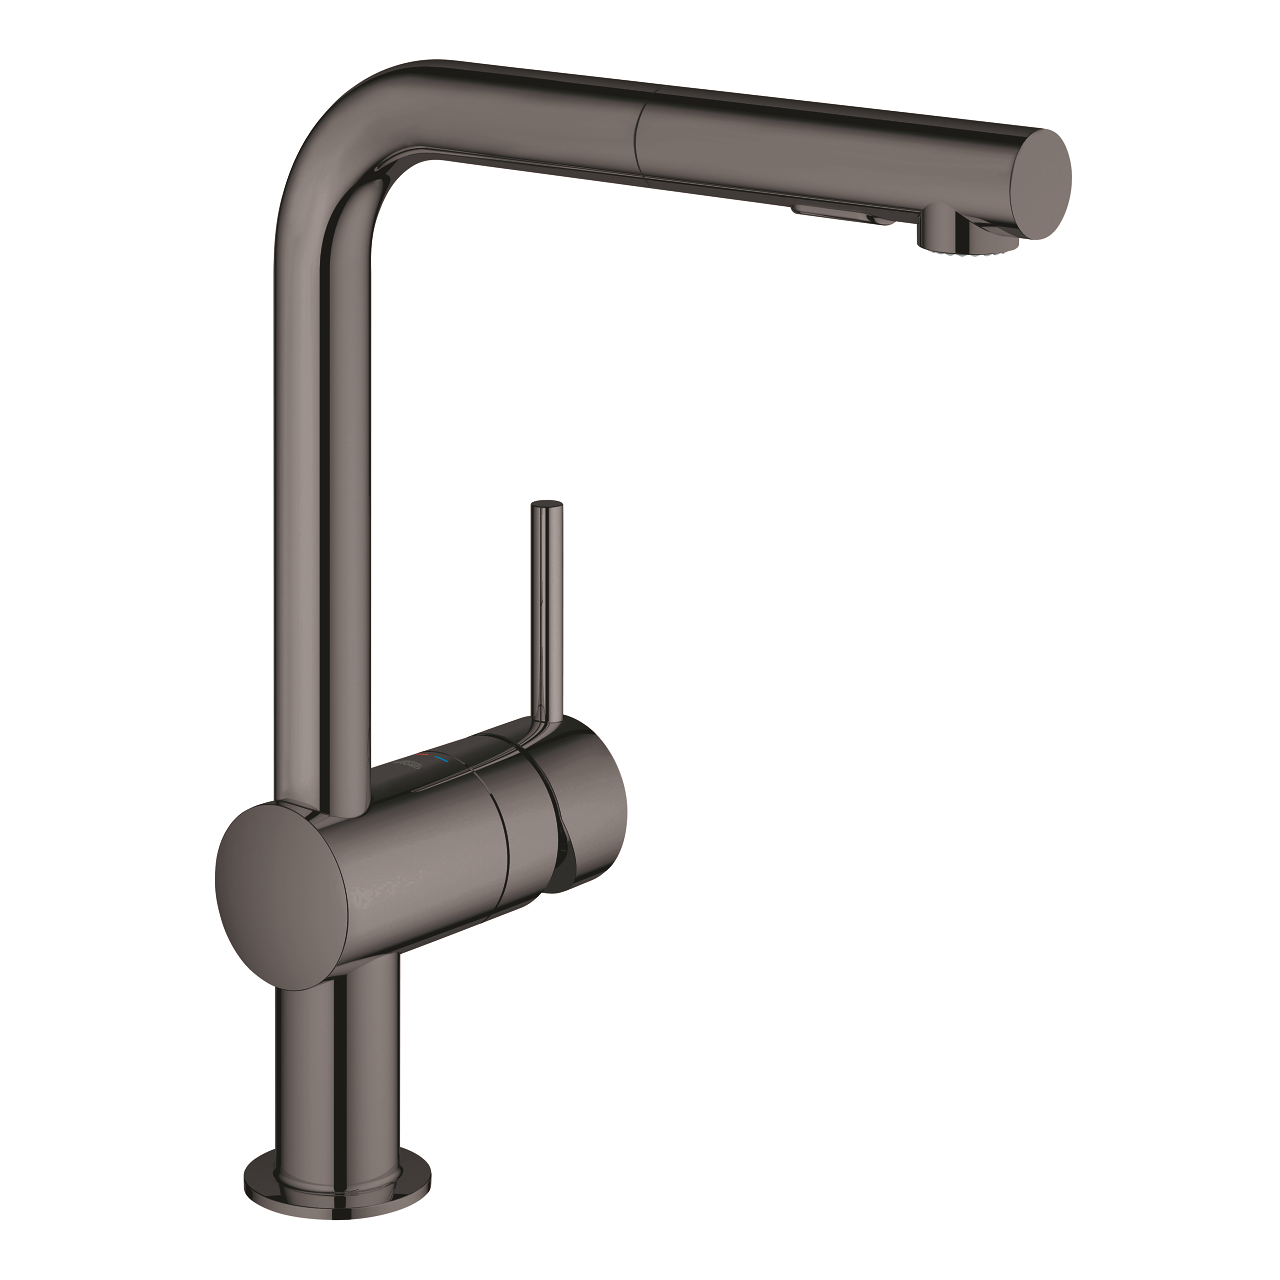 Baterie bucatarie Grohe Minta cu dus extractibil dual spray pipa L hard graphite baterie